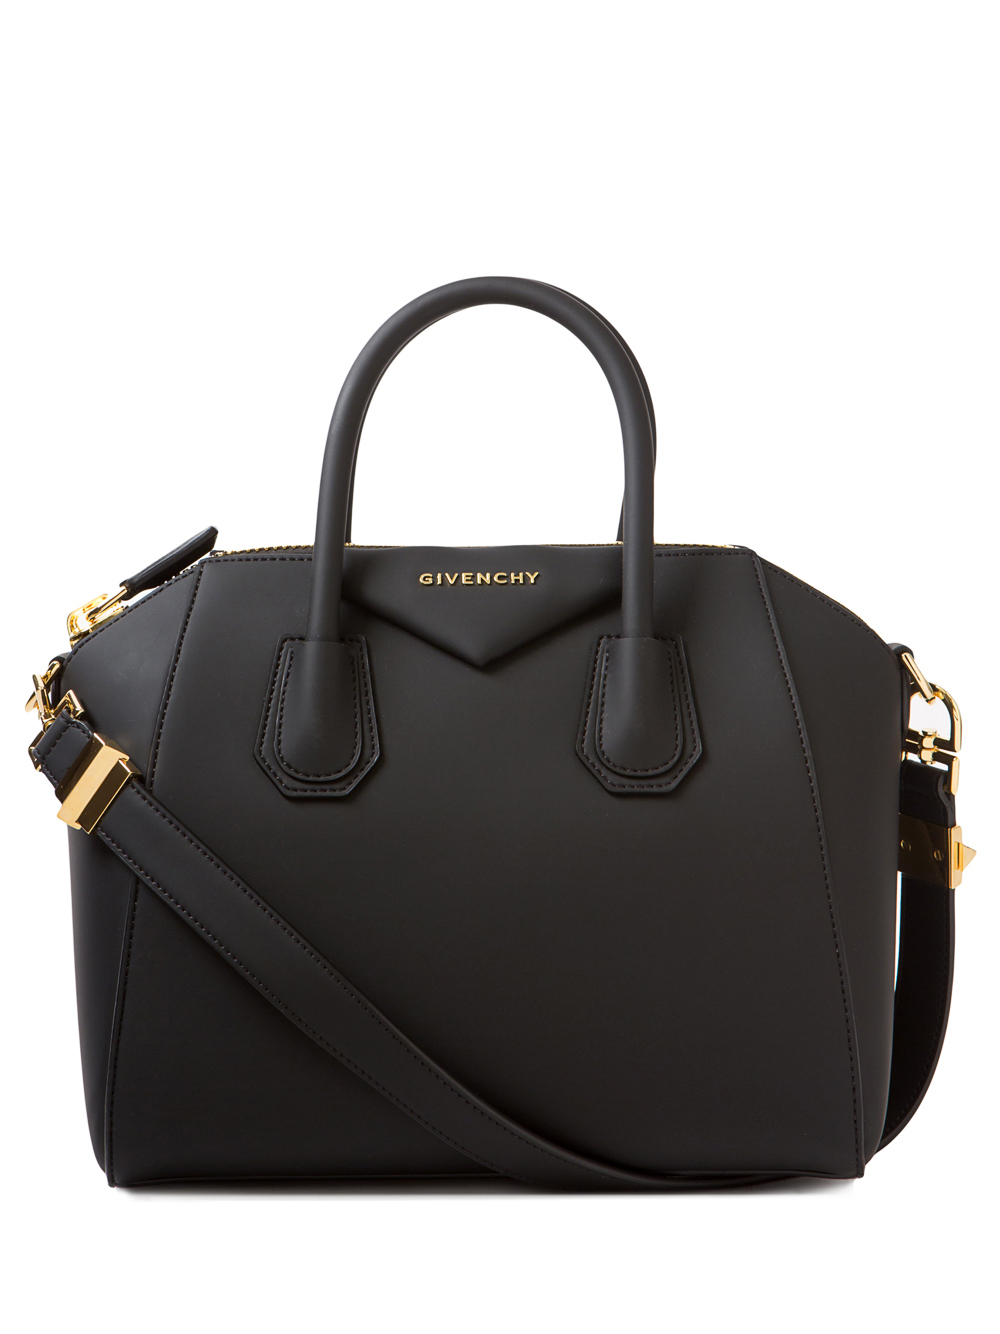 givenchy rubber bag